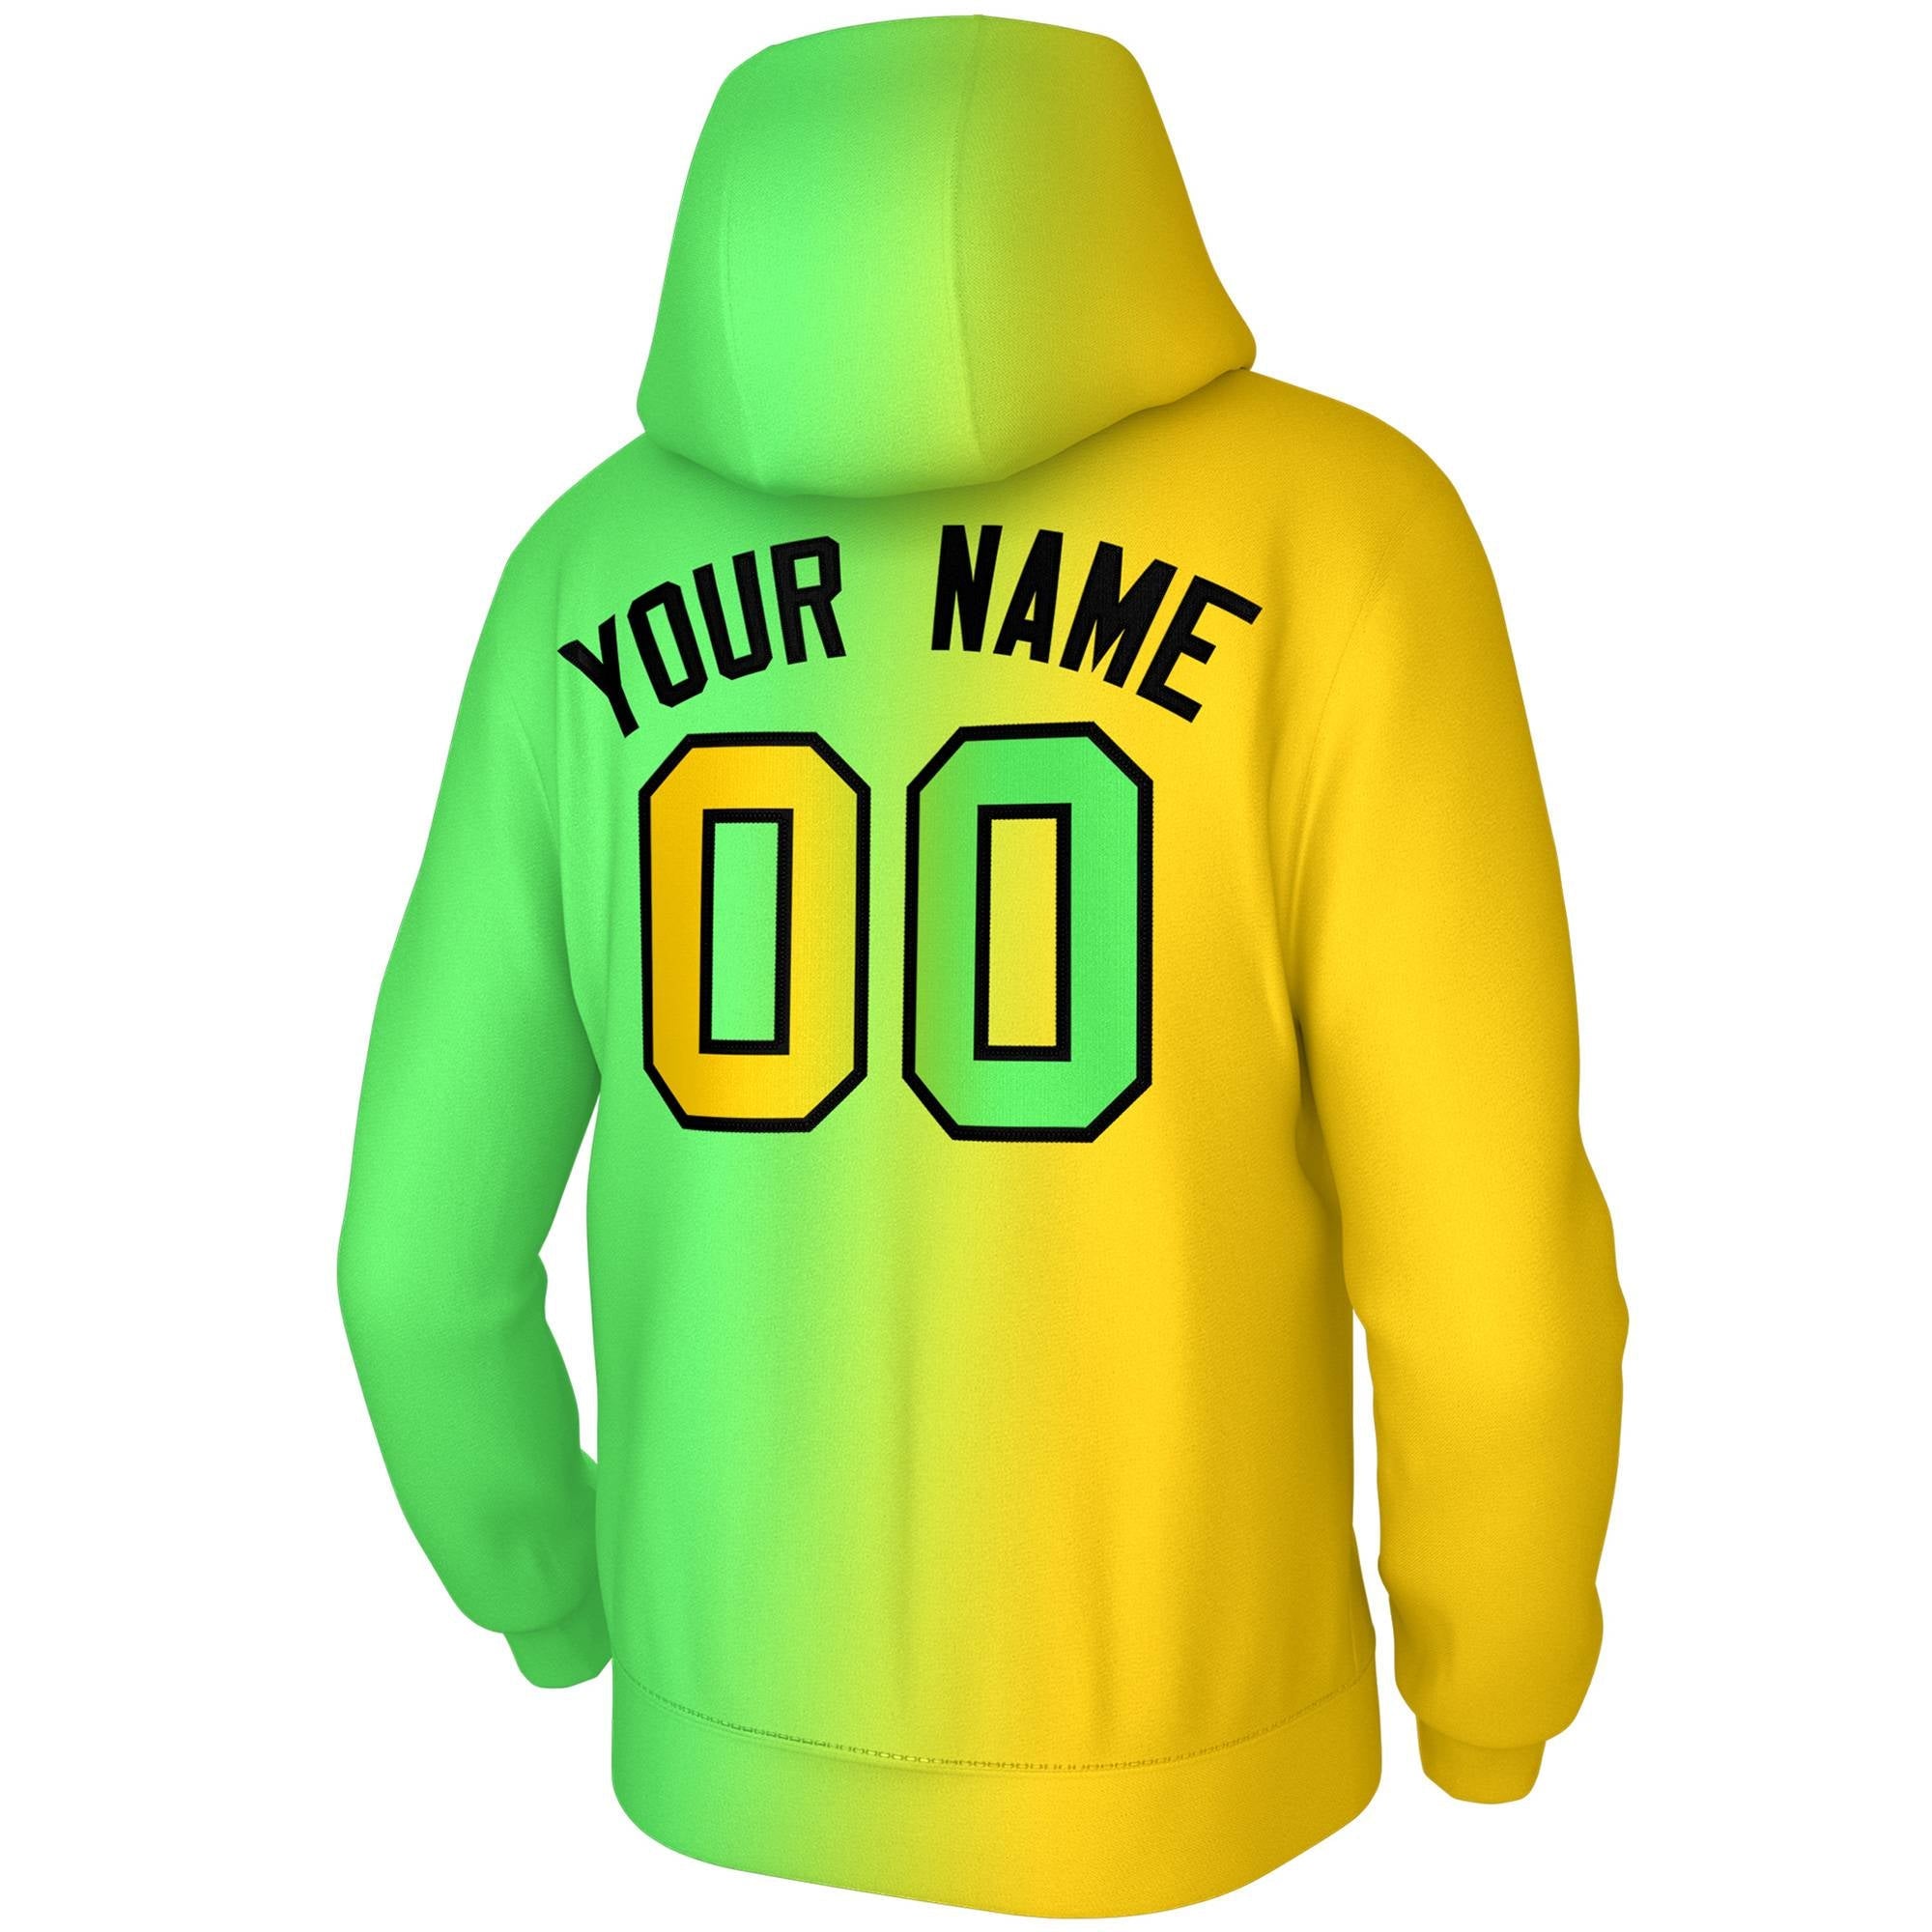 cusomize pullover hoodies top for men stylish